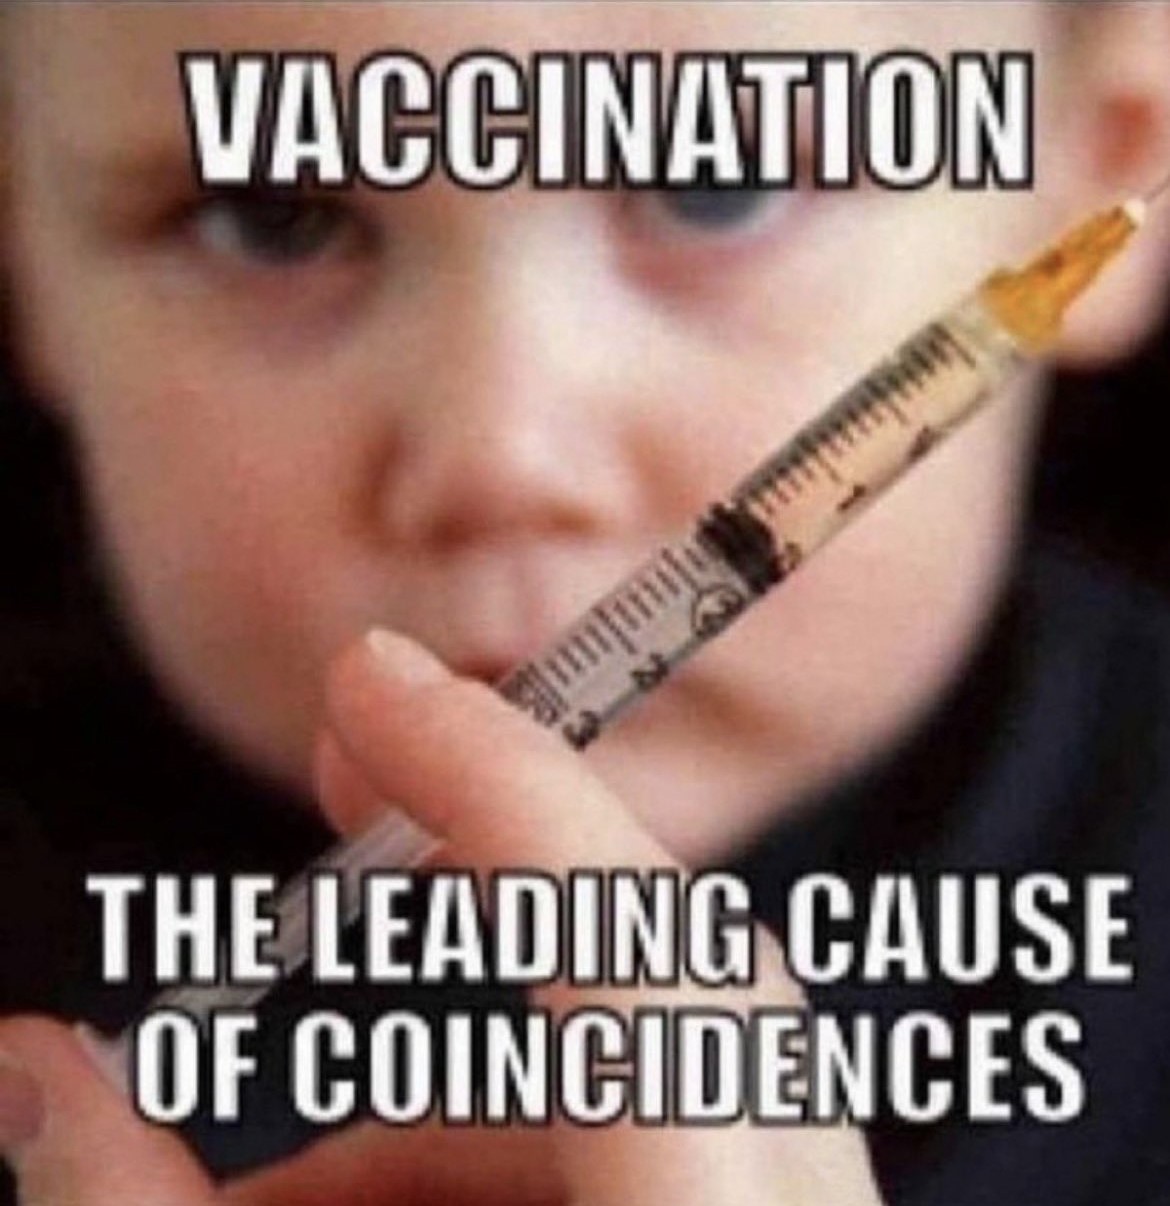 Vaccination is the leading cause of coincidence